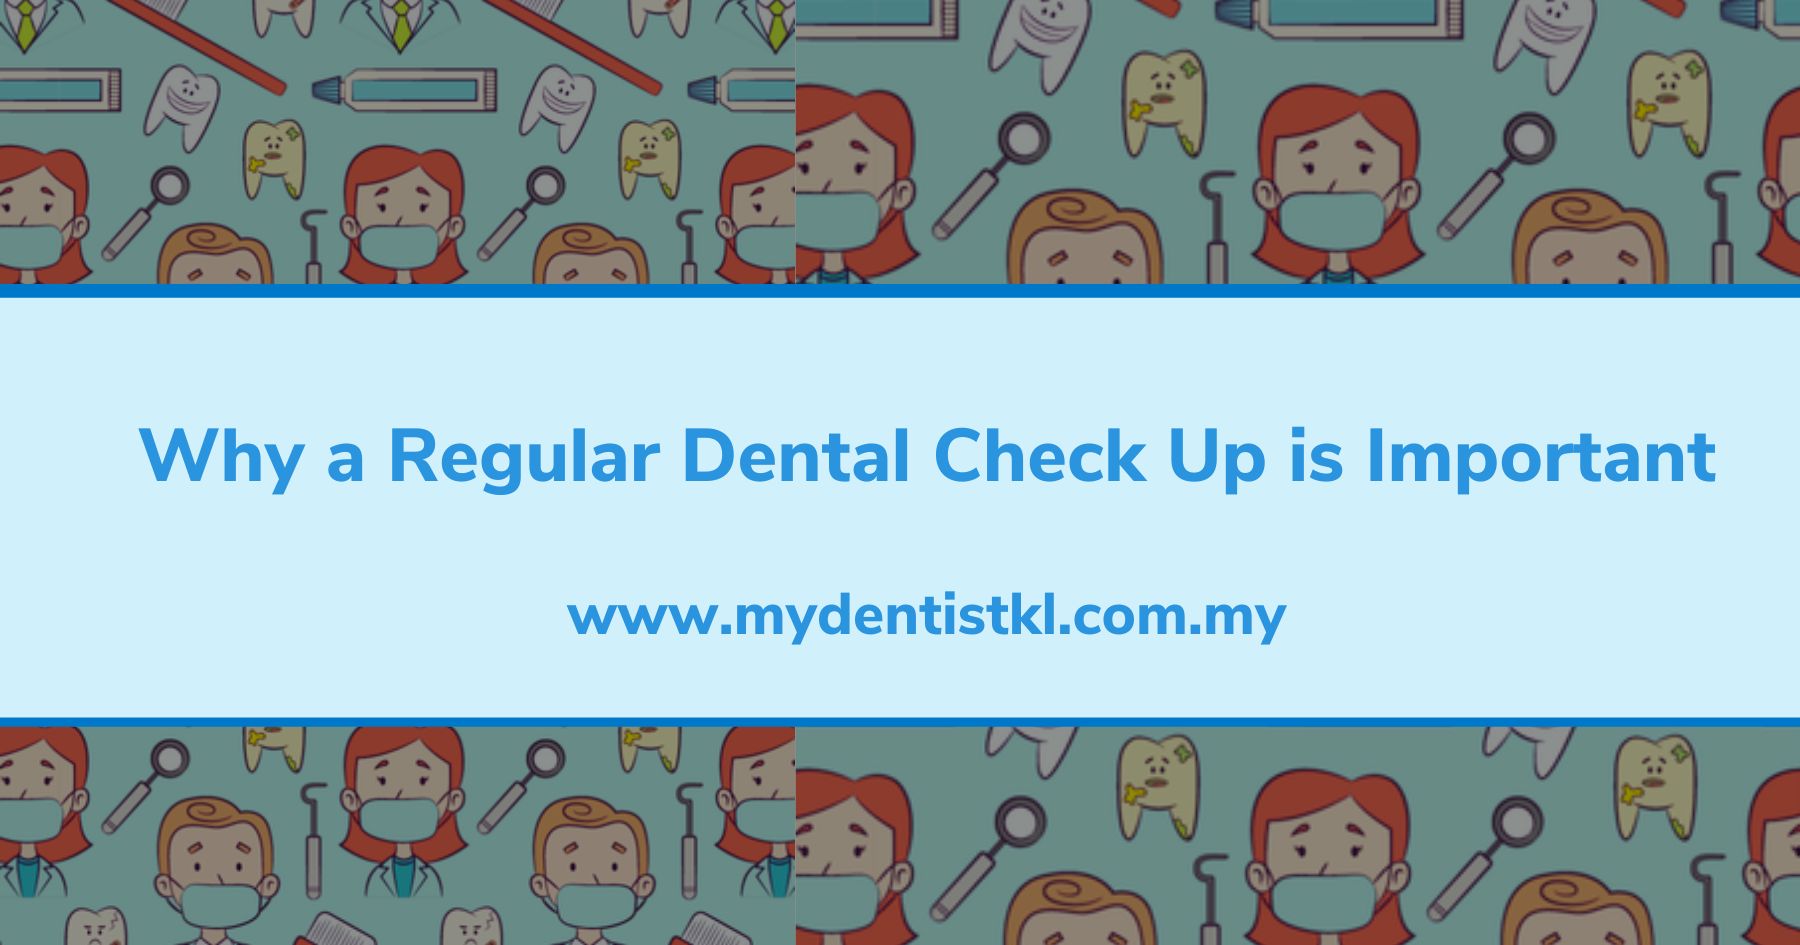 Why a Regular Dental Check Up is Important